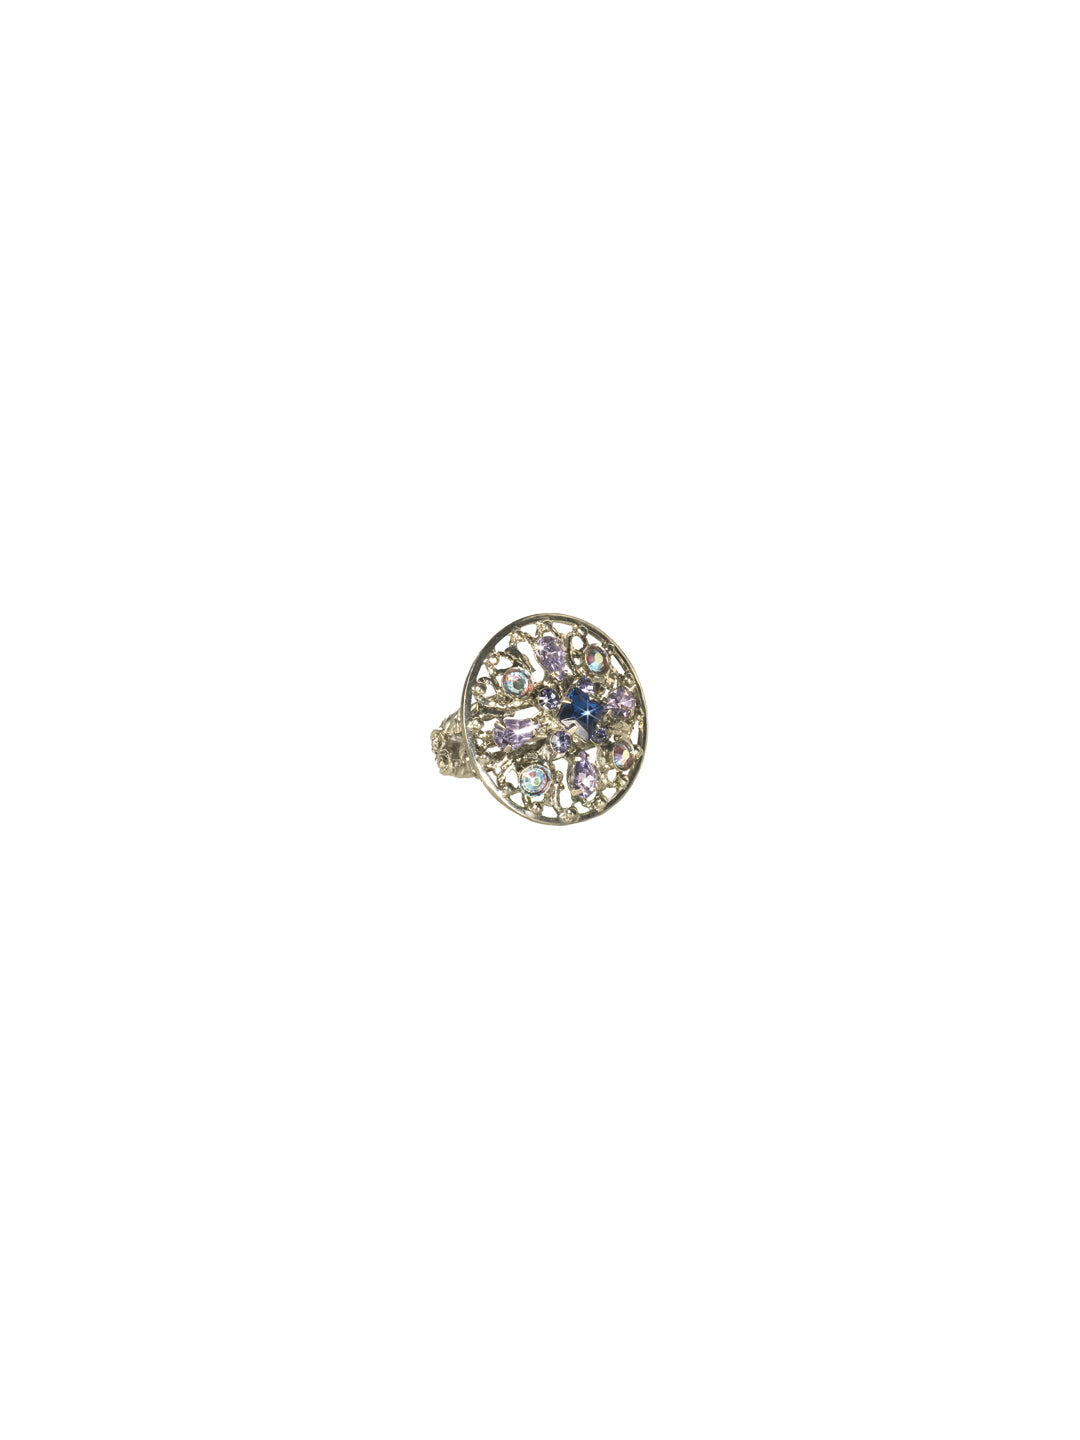 Dazzling Digits Ring - RCP8ASHY - This intricately designed ring combines round stones and one large square crystal to perfect the princess look. With this bright bauble, you'll never feel out of the spotlight again! From Sorrelli's Hydrangea collection in our Antique Silver-tone finish.